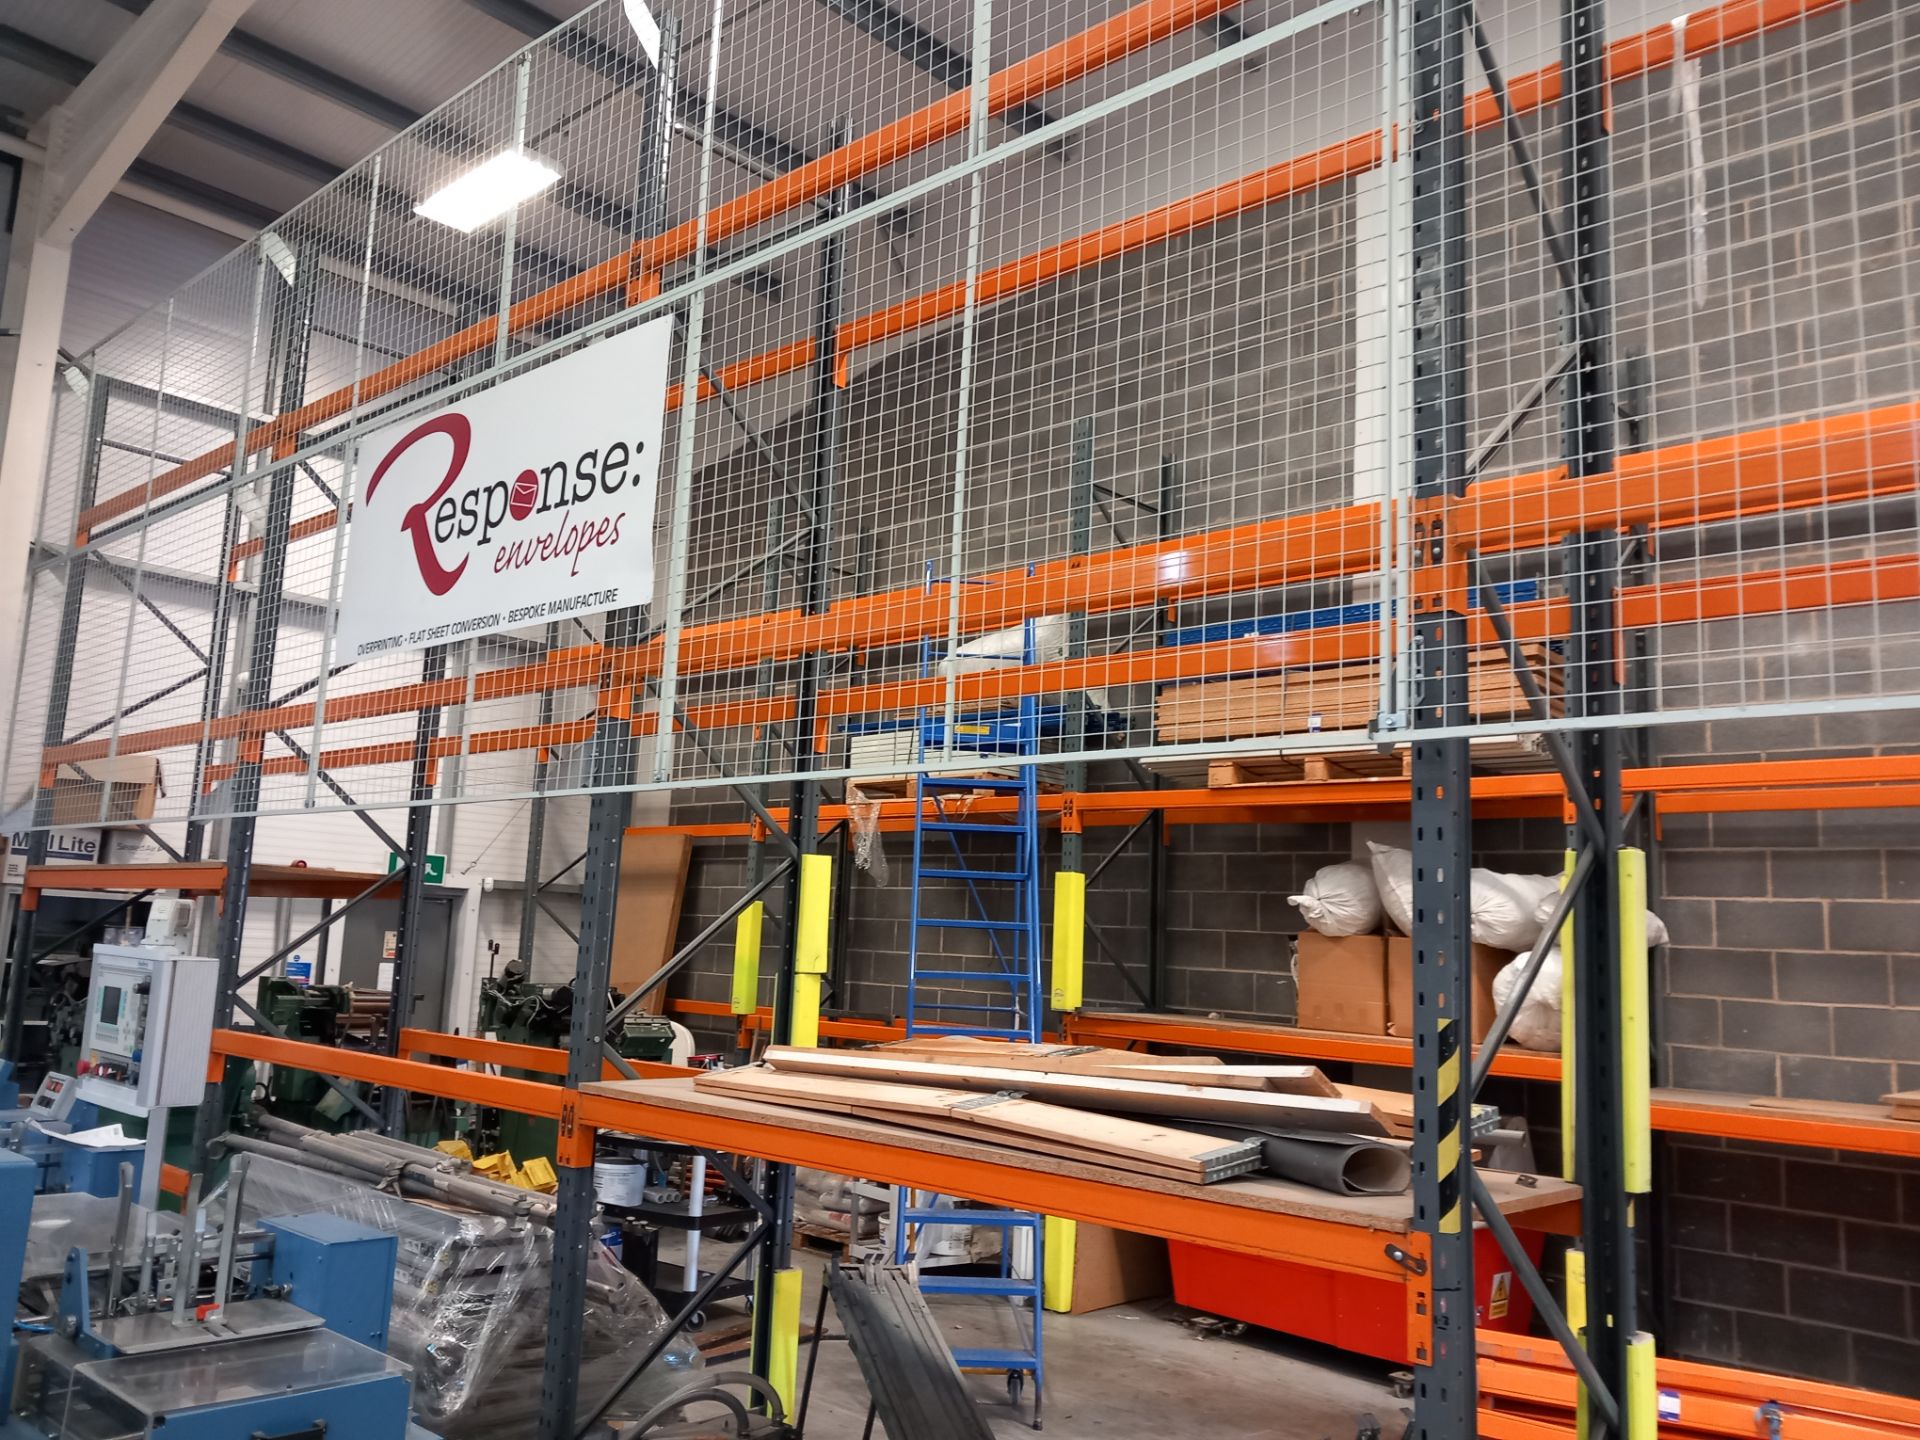 16 Bays of Dexion Speedlock boltless steel pallet racking with spare beams & guard railing & shelf - Image 7 of 9